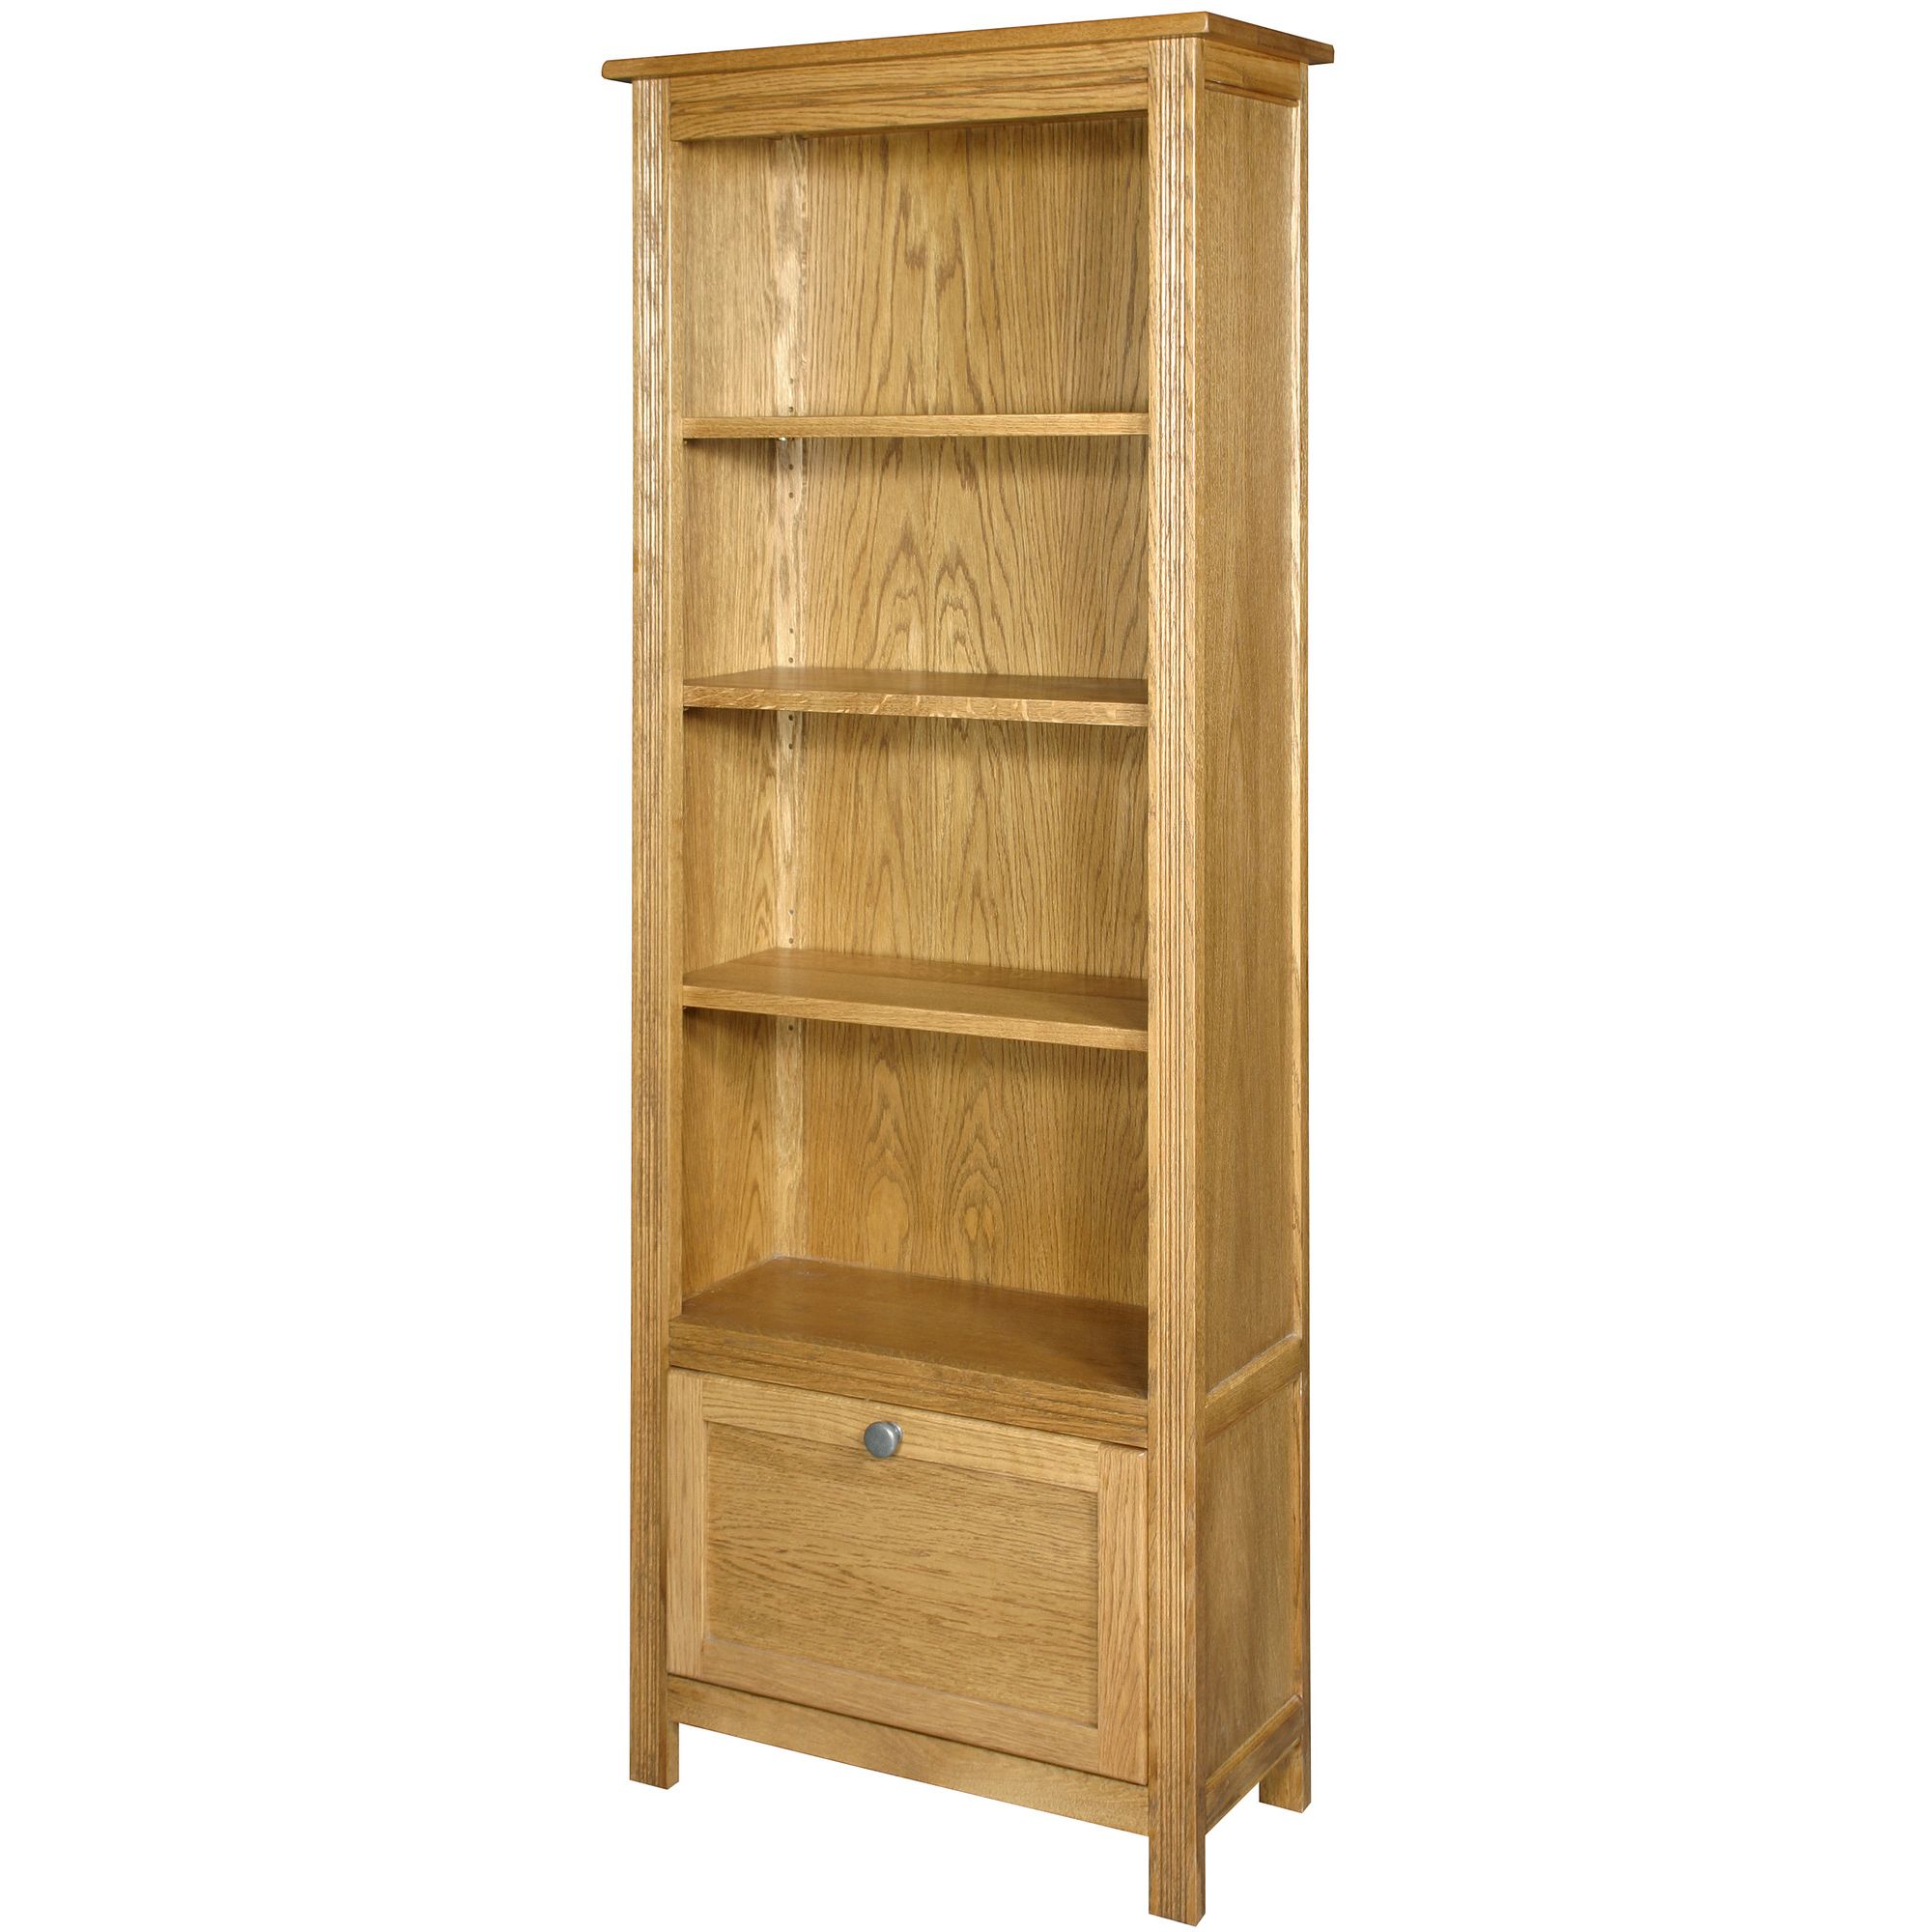 Old Charm Hertford Narrow Bookcase with Magazine Rack - Natural at Tesco Direct